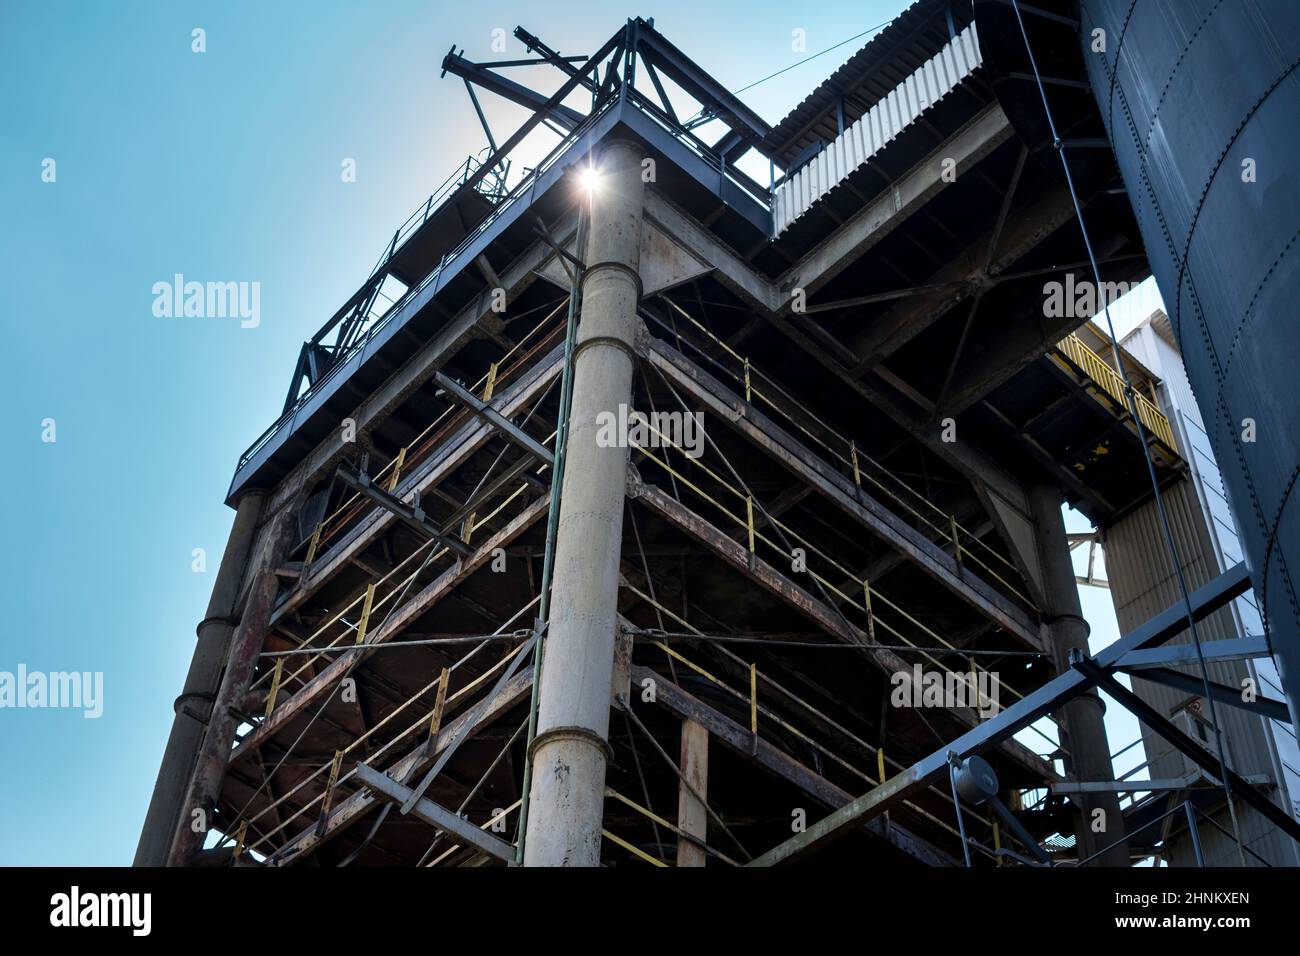 metal construction inside of an ironworks Stock Photo